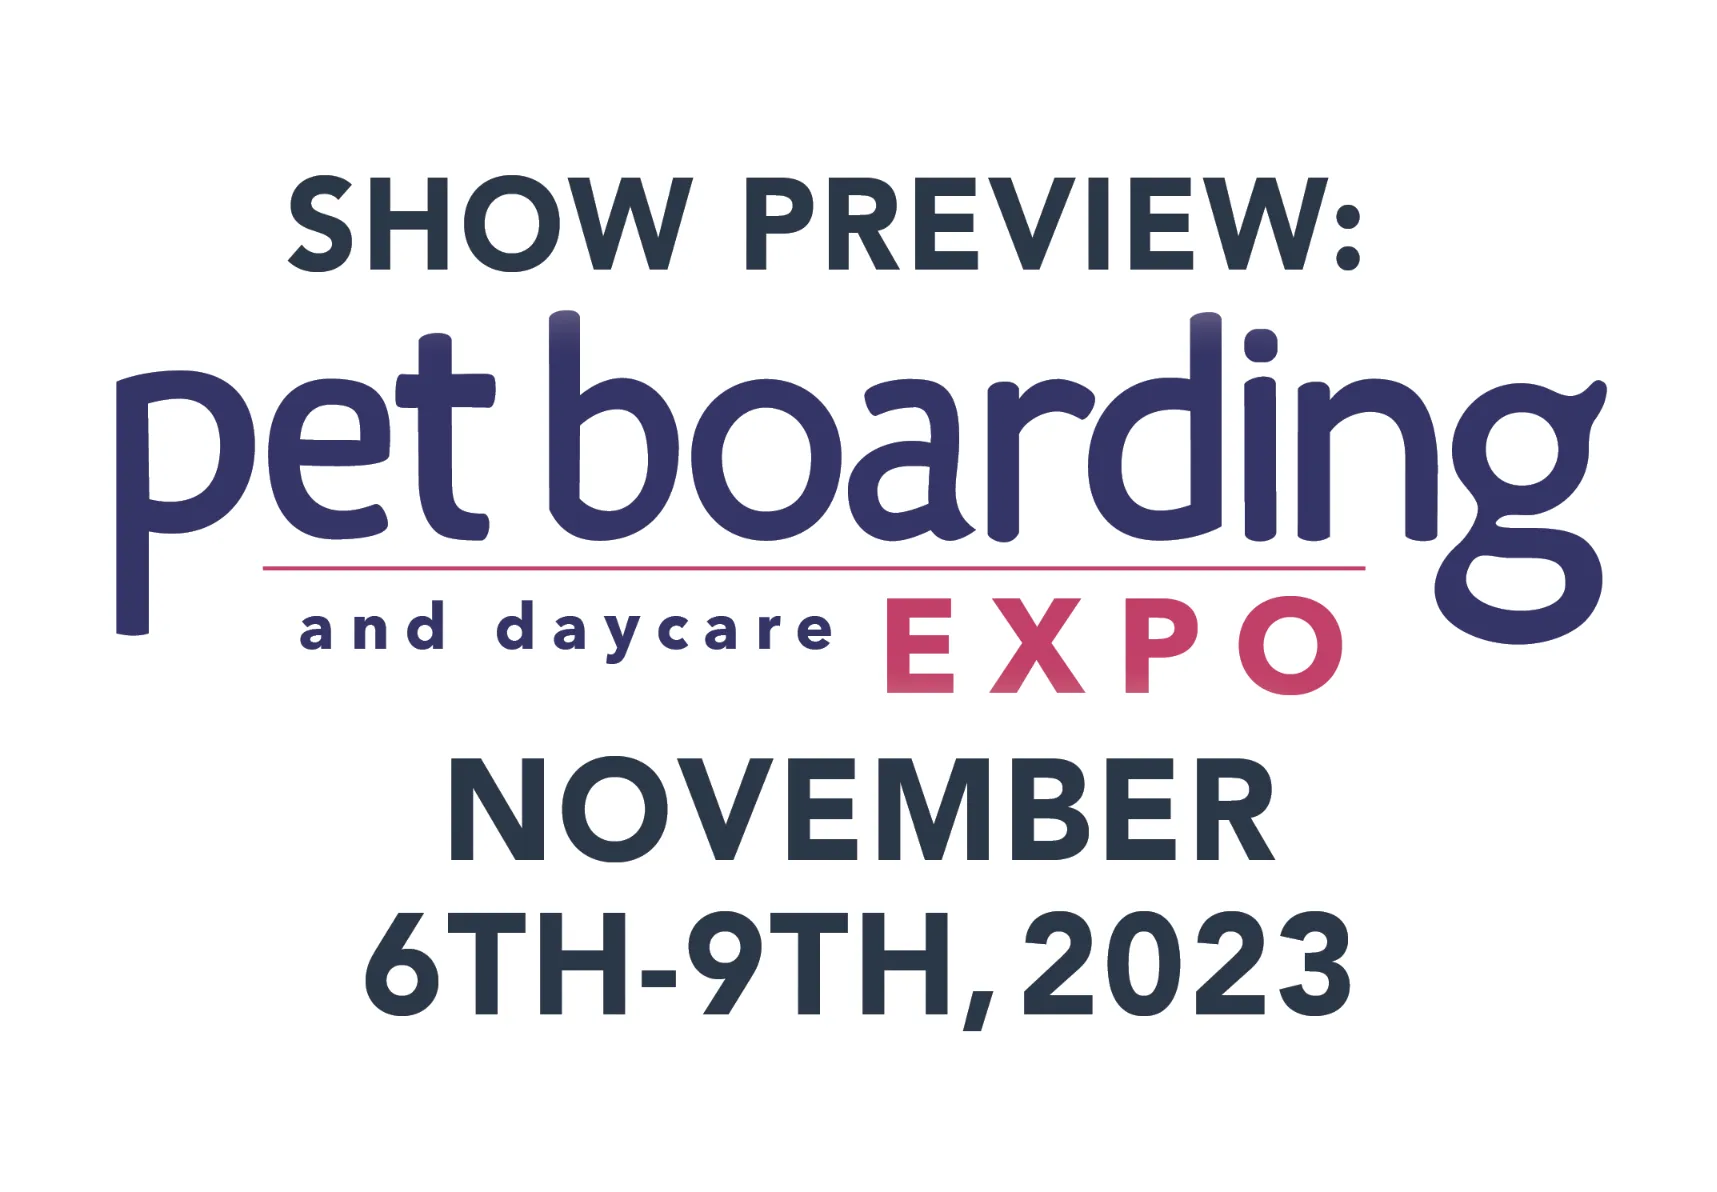 Show Preview: Pet Boarding and Daycare Expo November 6th-9th, 2023